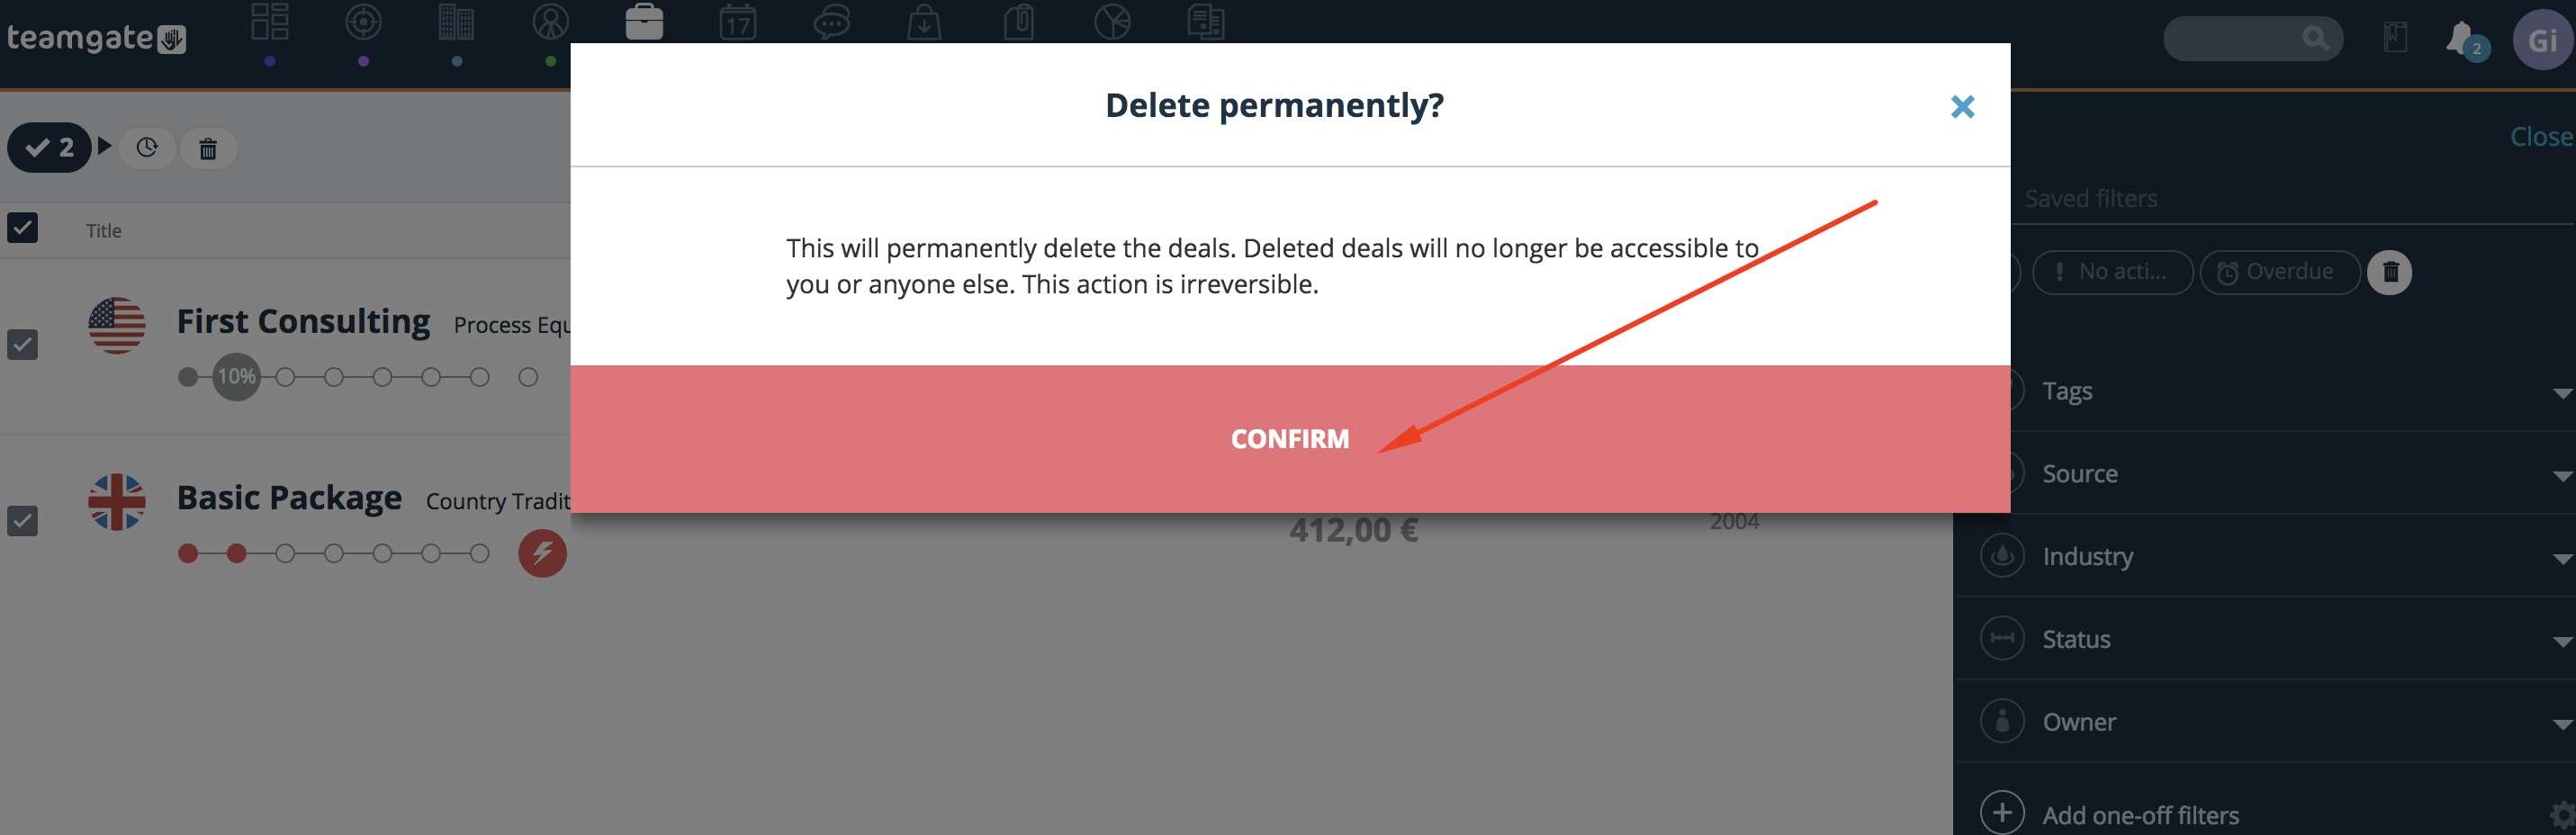 delete-permanently-confirm-Teamgate.png